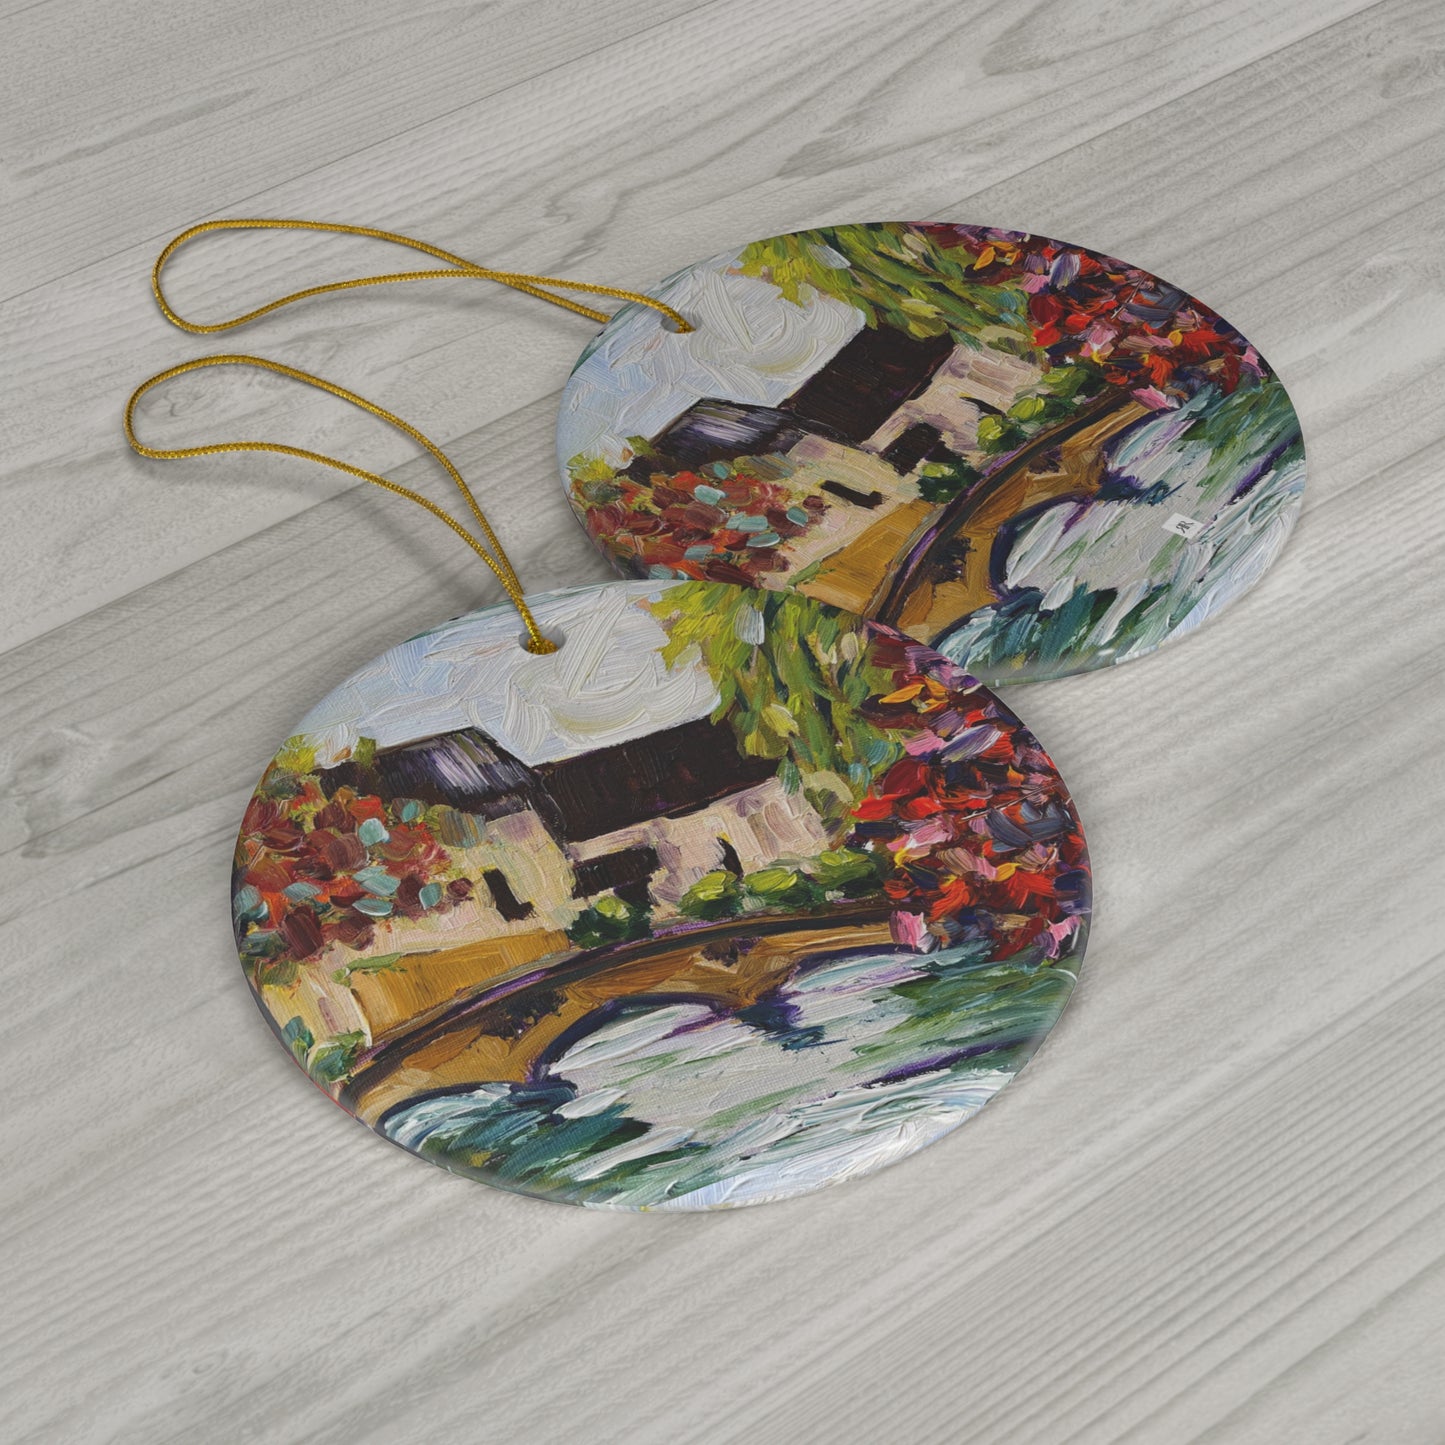 Bourton on the Water in Autumn Cotswolds Ceramic Ornament